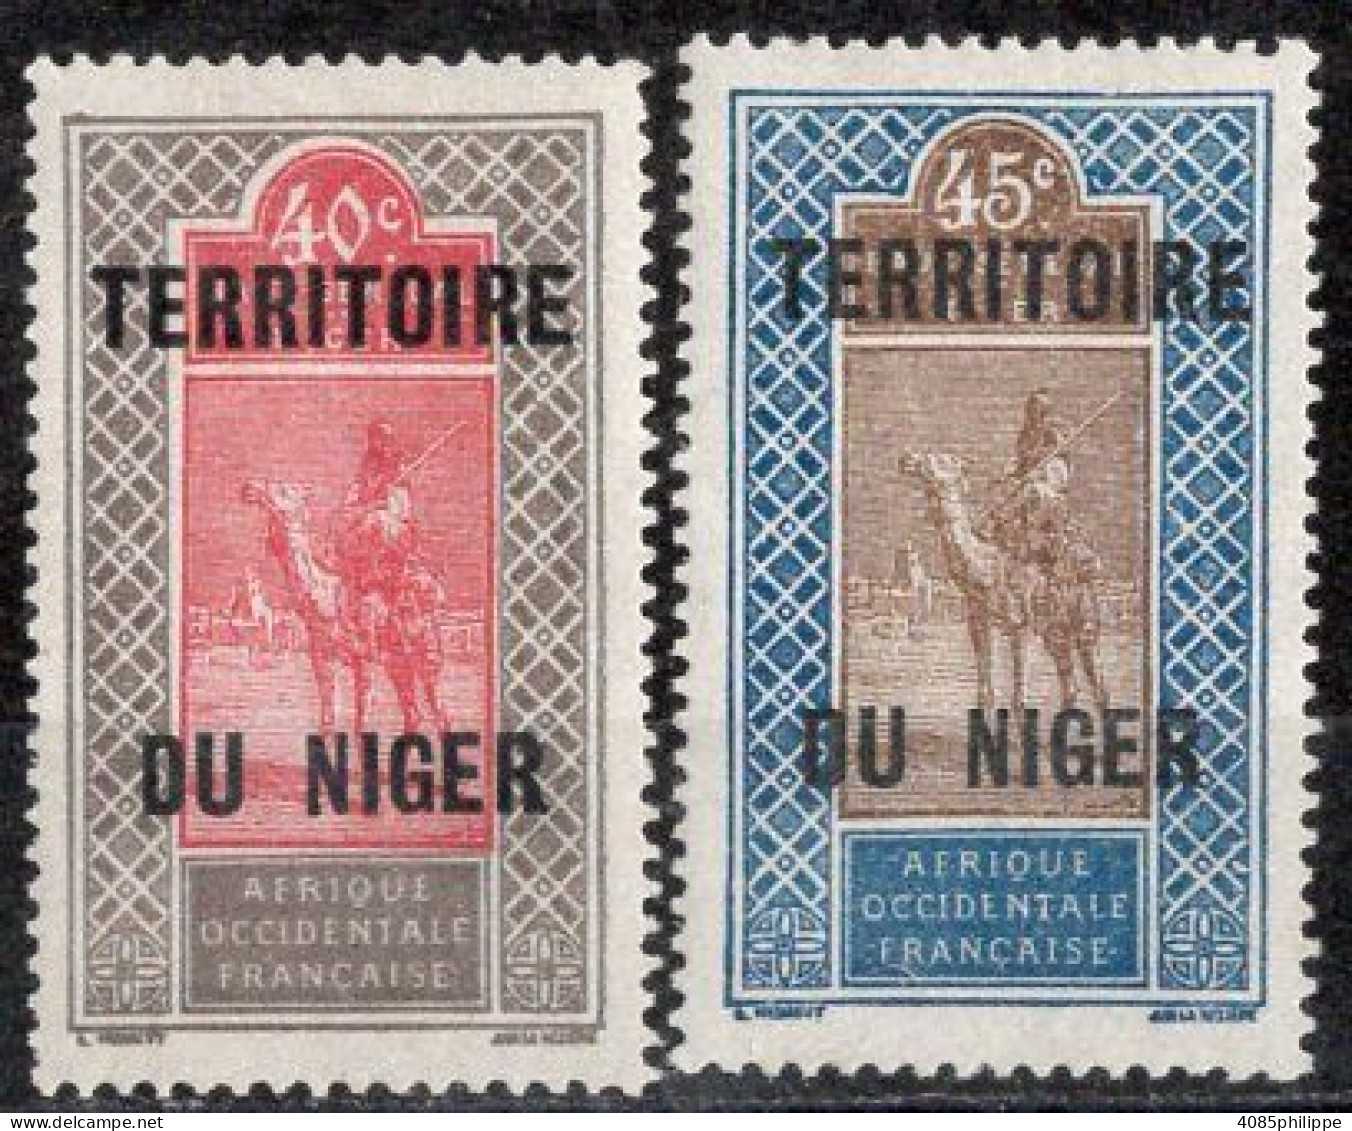 NIGER Timbres-poste N°11* & 12* Neufs Charnières TB Cote : 2€75 - Unused Stamps